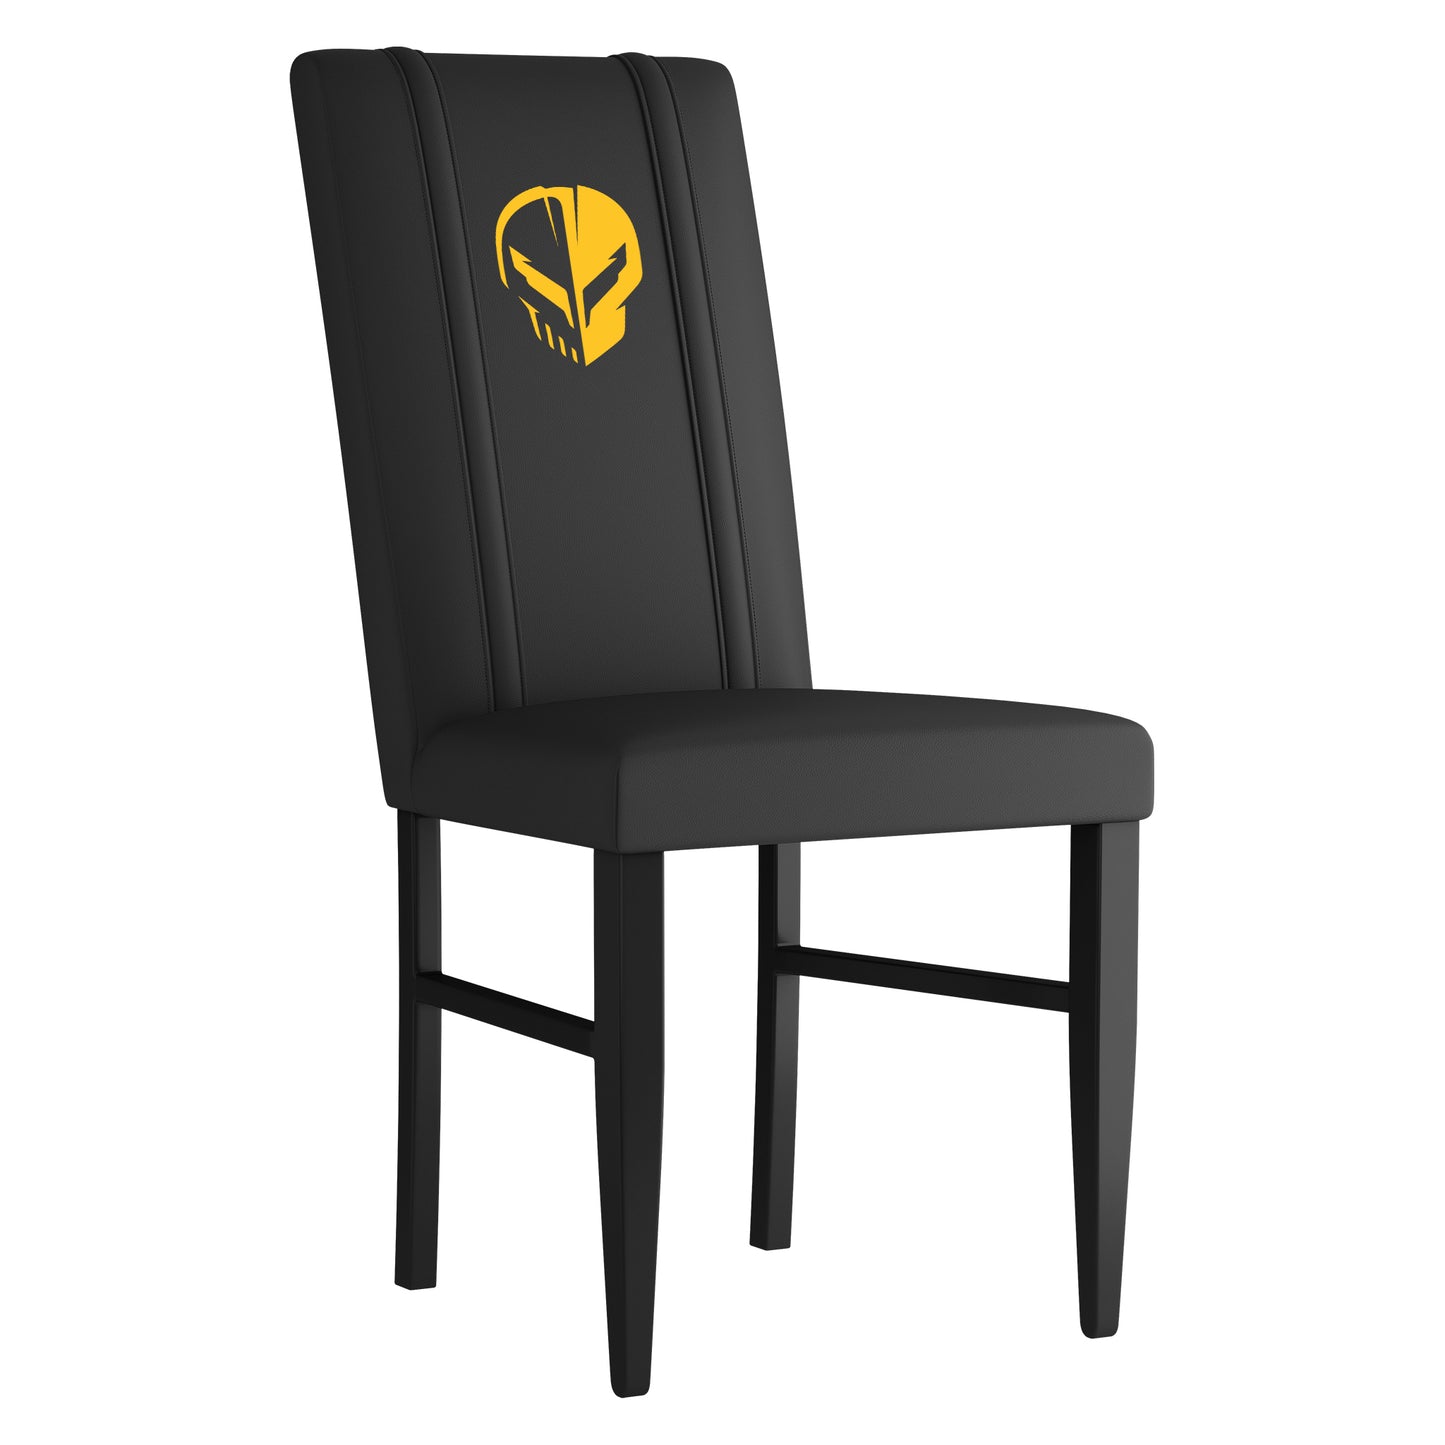 Side Chair 2000 with Corvette Jake Symbol Yellow Logo Set of 2